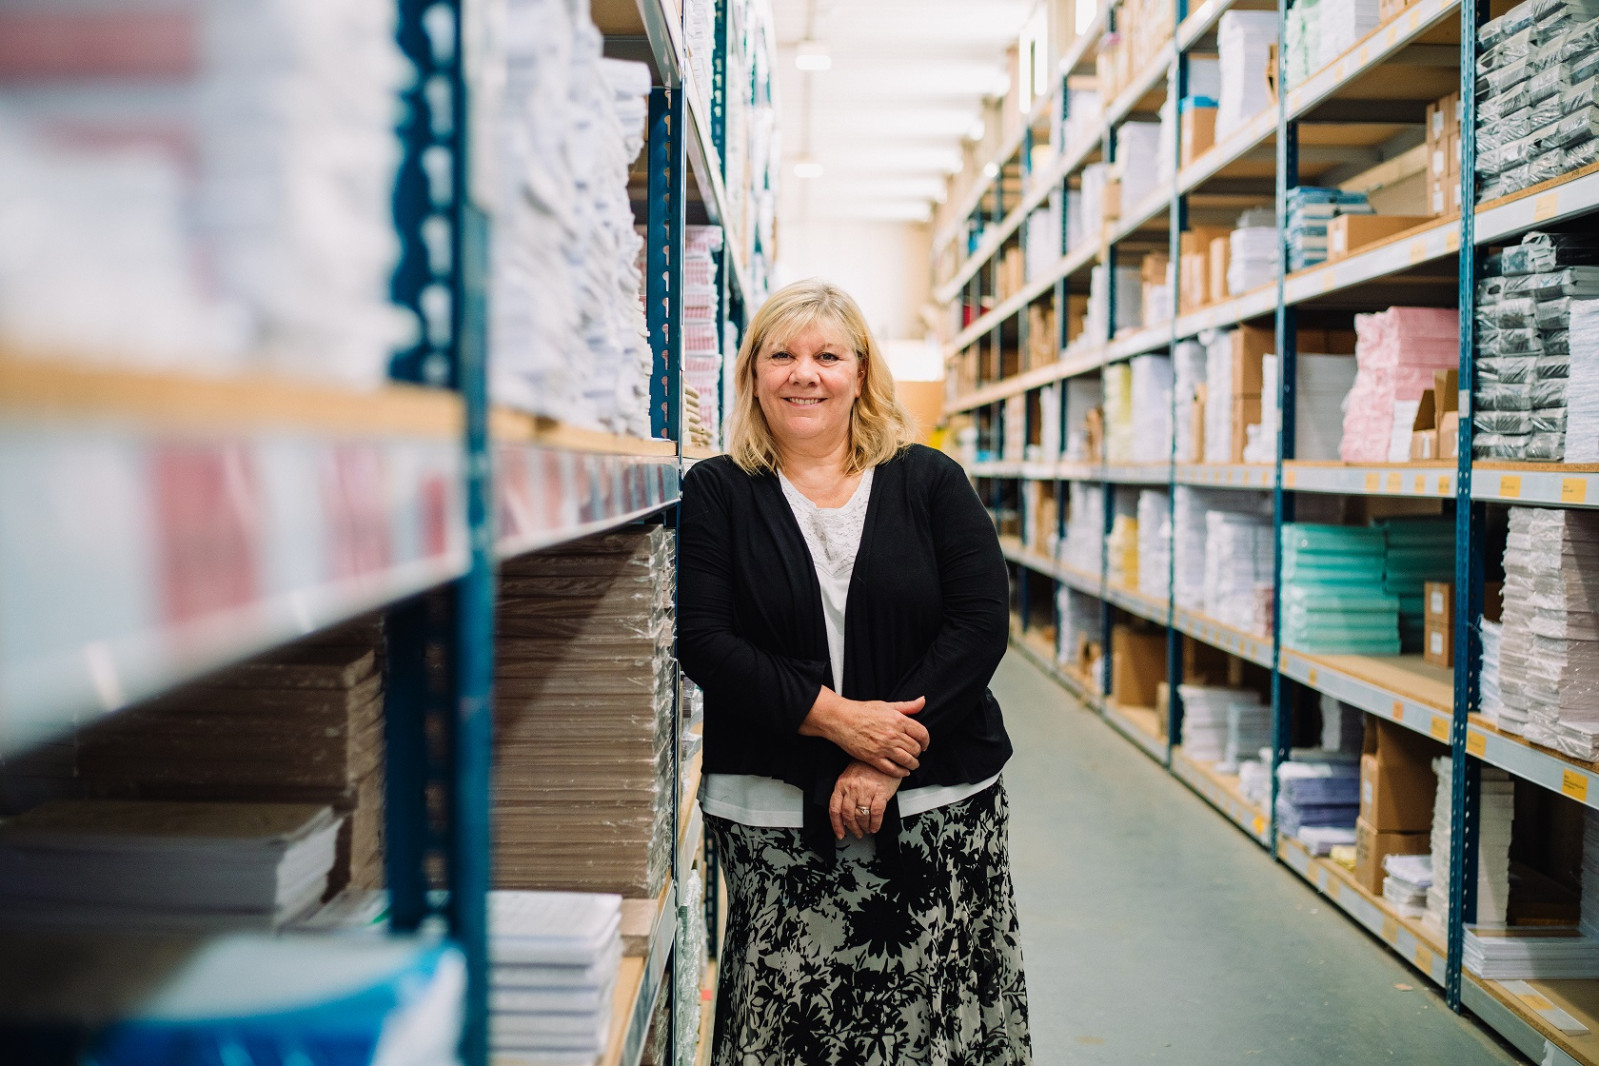 Shaking up the gender divide in the print industry as  business woman calls for more to be done